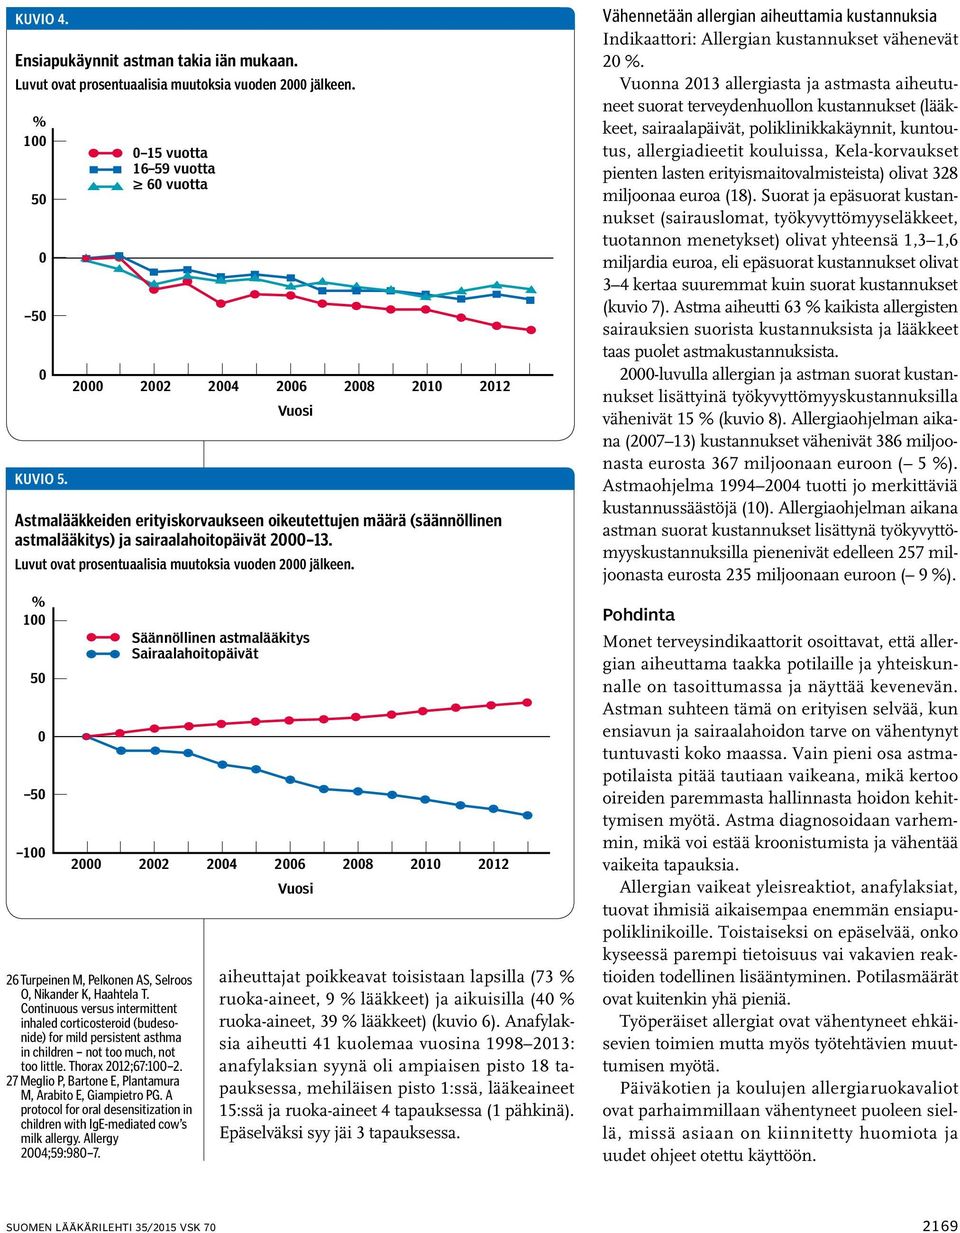 Continuous versus intermittent inhaled corticosteroid (budesonide) for mild persistent asthma in children not too much, not too little. Thorax 2012;67:100 2.